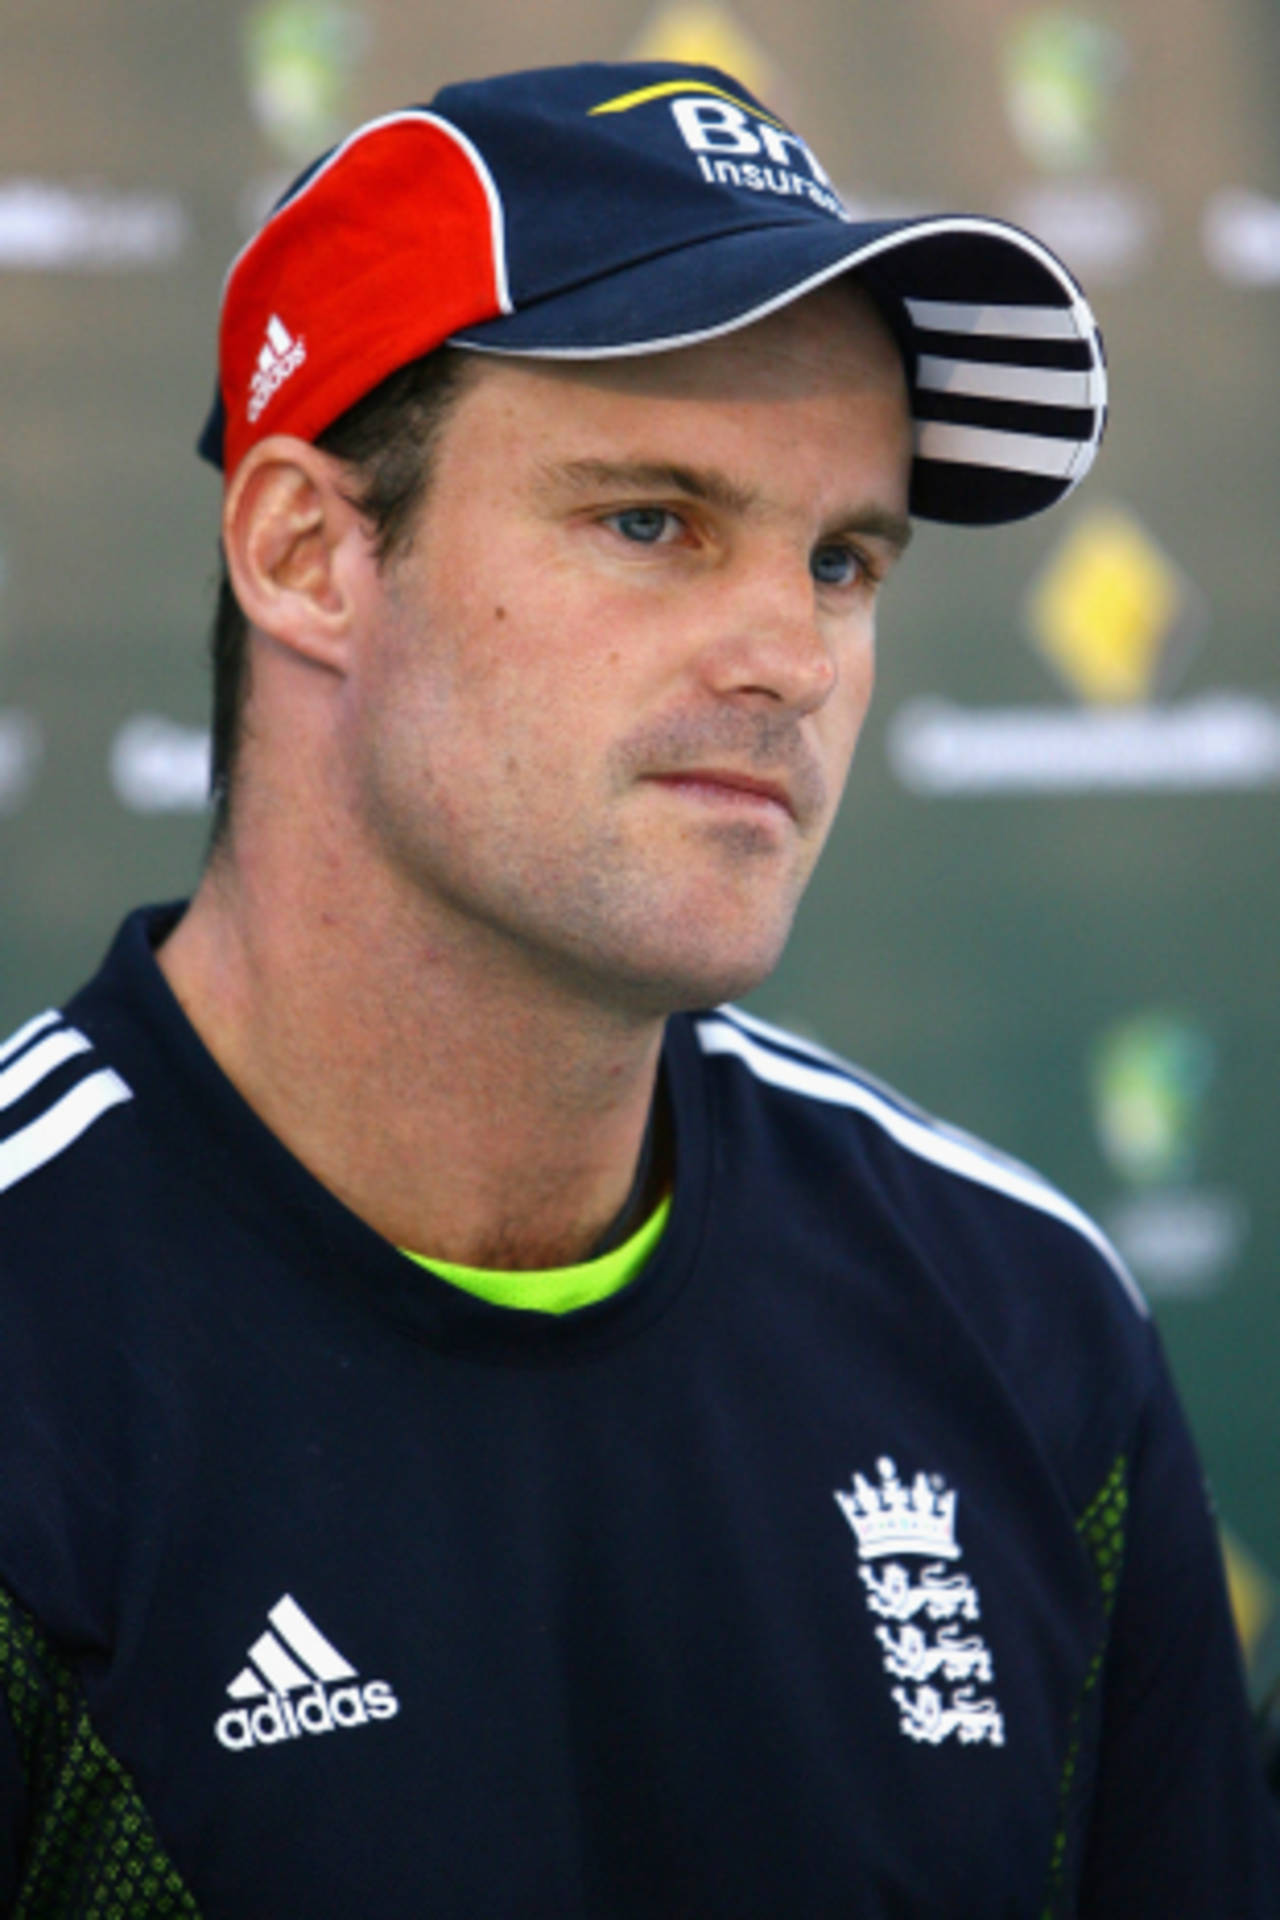 England captain Andrew Strauss addresses a press conference in Melbourne, January 15, 2011